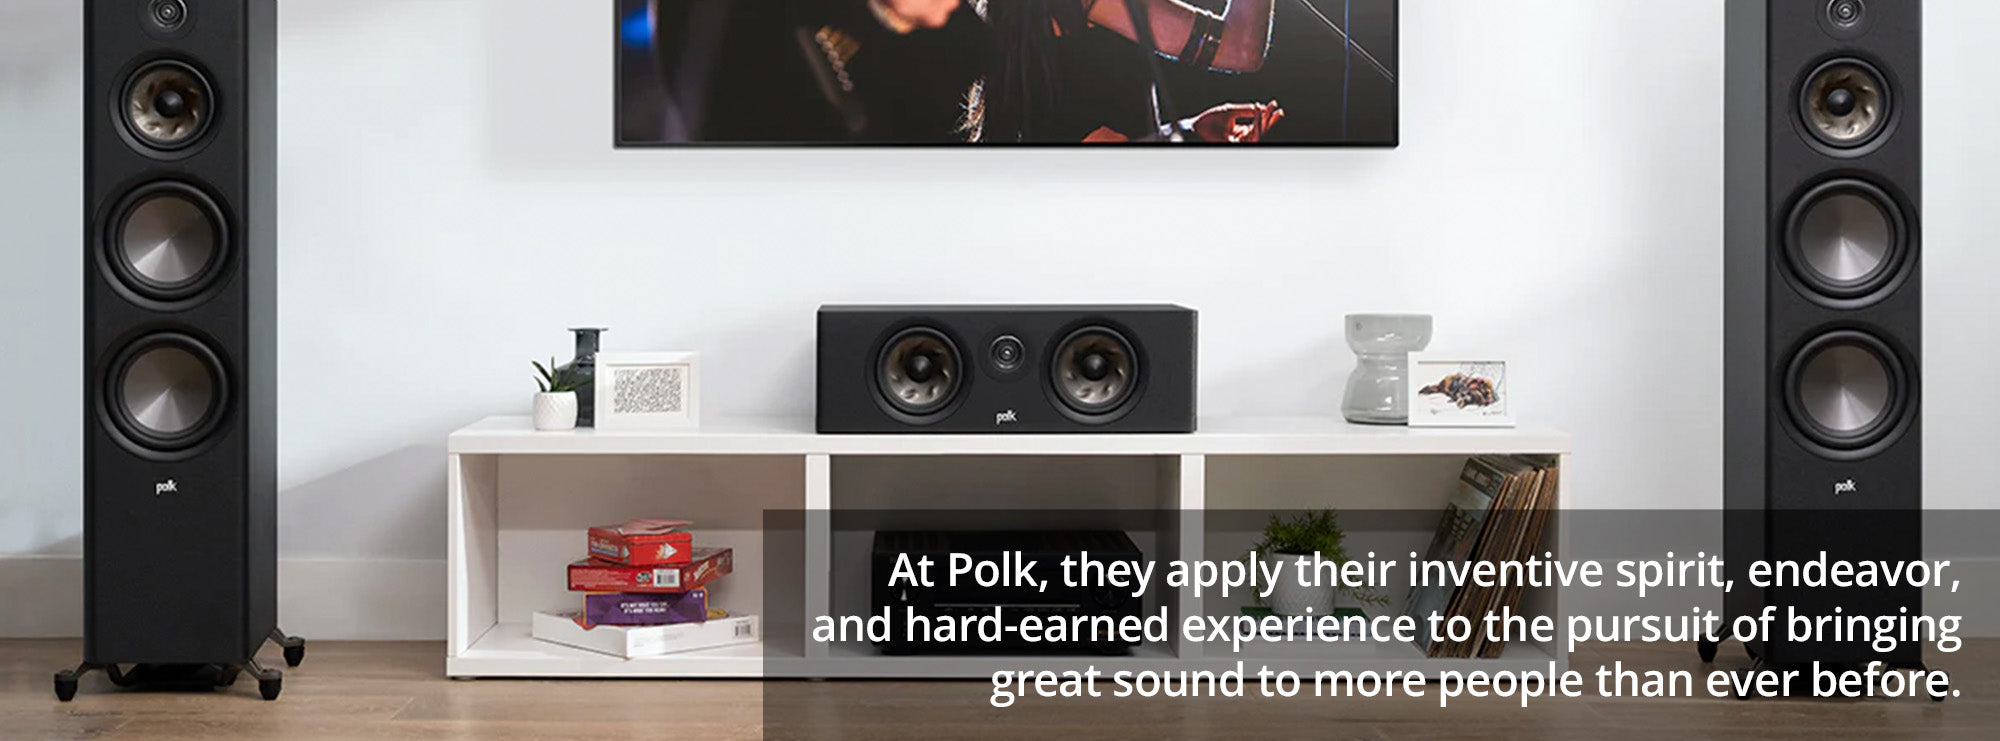 At Polk, they apply their inventive spirit, endeavor, and hard-earned experience to the pursuit of bringing great sound to more people than ever before.